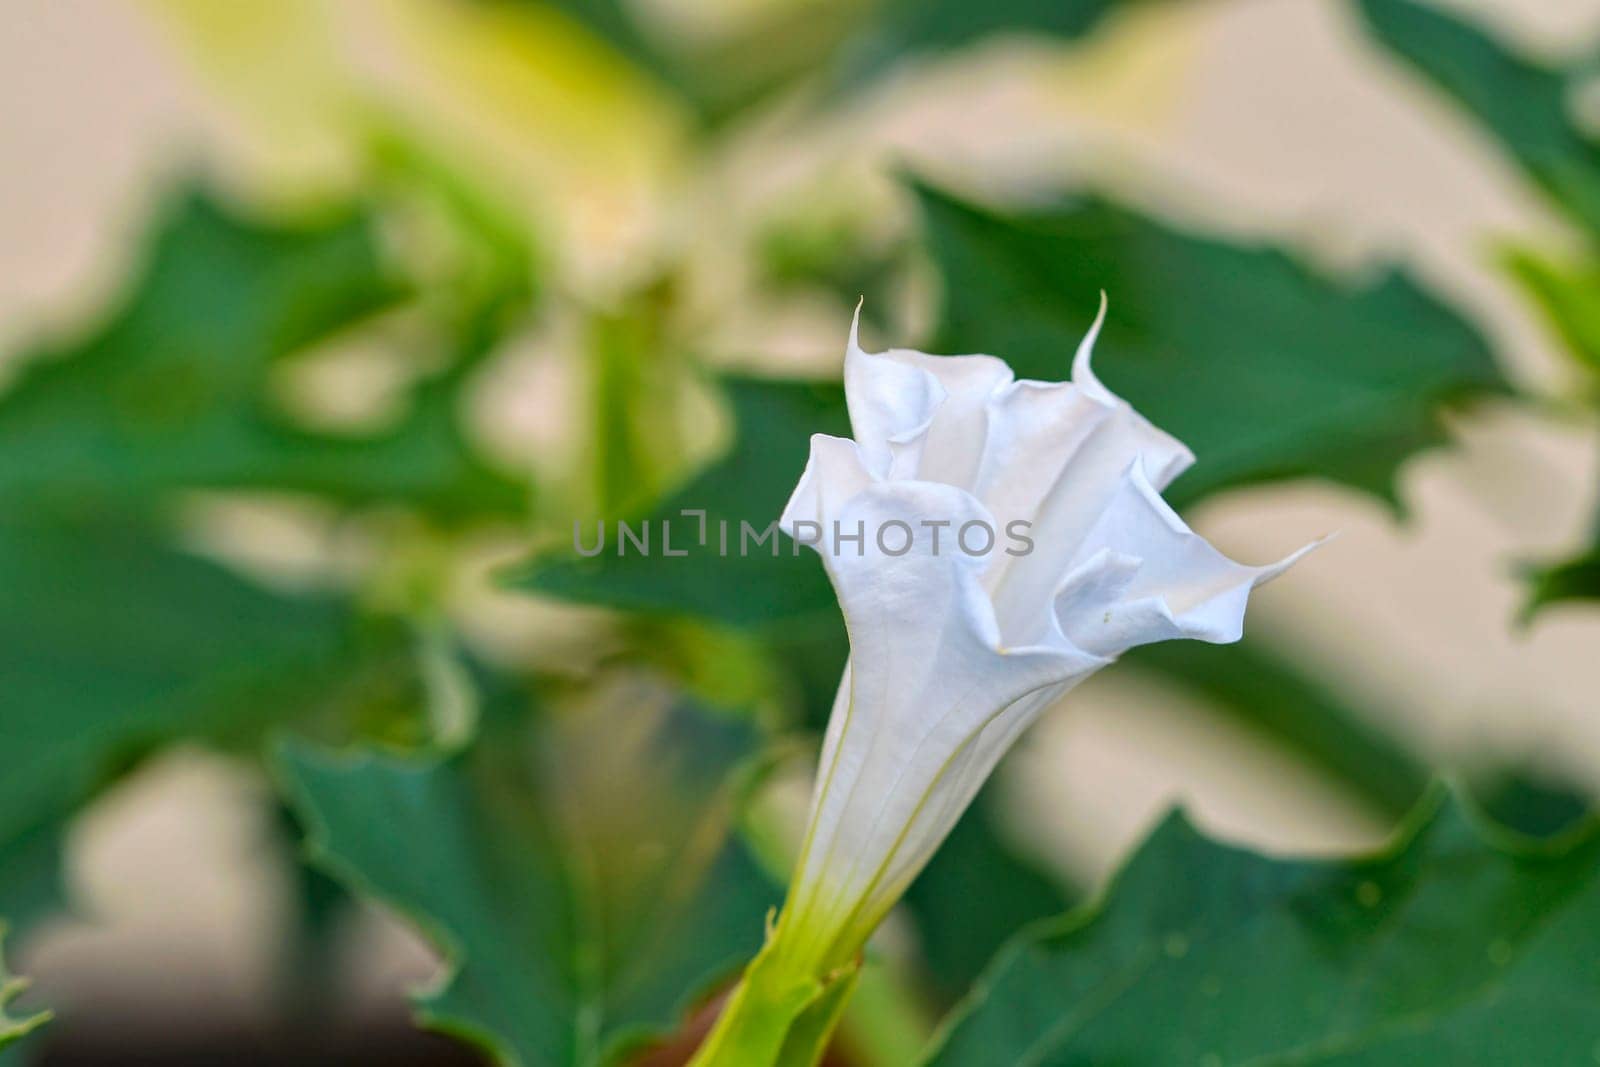 Datura stramonium, known by the common names, jimson weed, ditch weed, stink weed, loco weed,Korean morning glory, Jamestown weed, thorn apple, angel's trumpet, devil's trumpet, devil's snare, devil's seed, mad hatter, crazy tea, malpitte, the Devil's balls, is an erect annual herb, on average 30 to 150 cm 1-5 feet tall with erect, forking and purple stems. The leaves are large, 7 to 20 cm 3-8 in long and have irregular teeth by roman_nerud